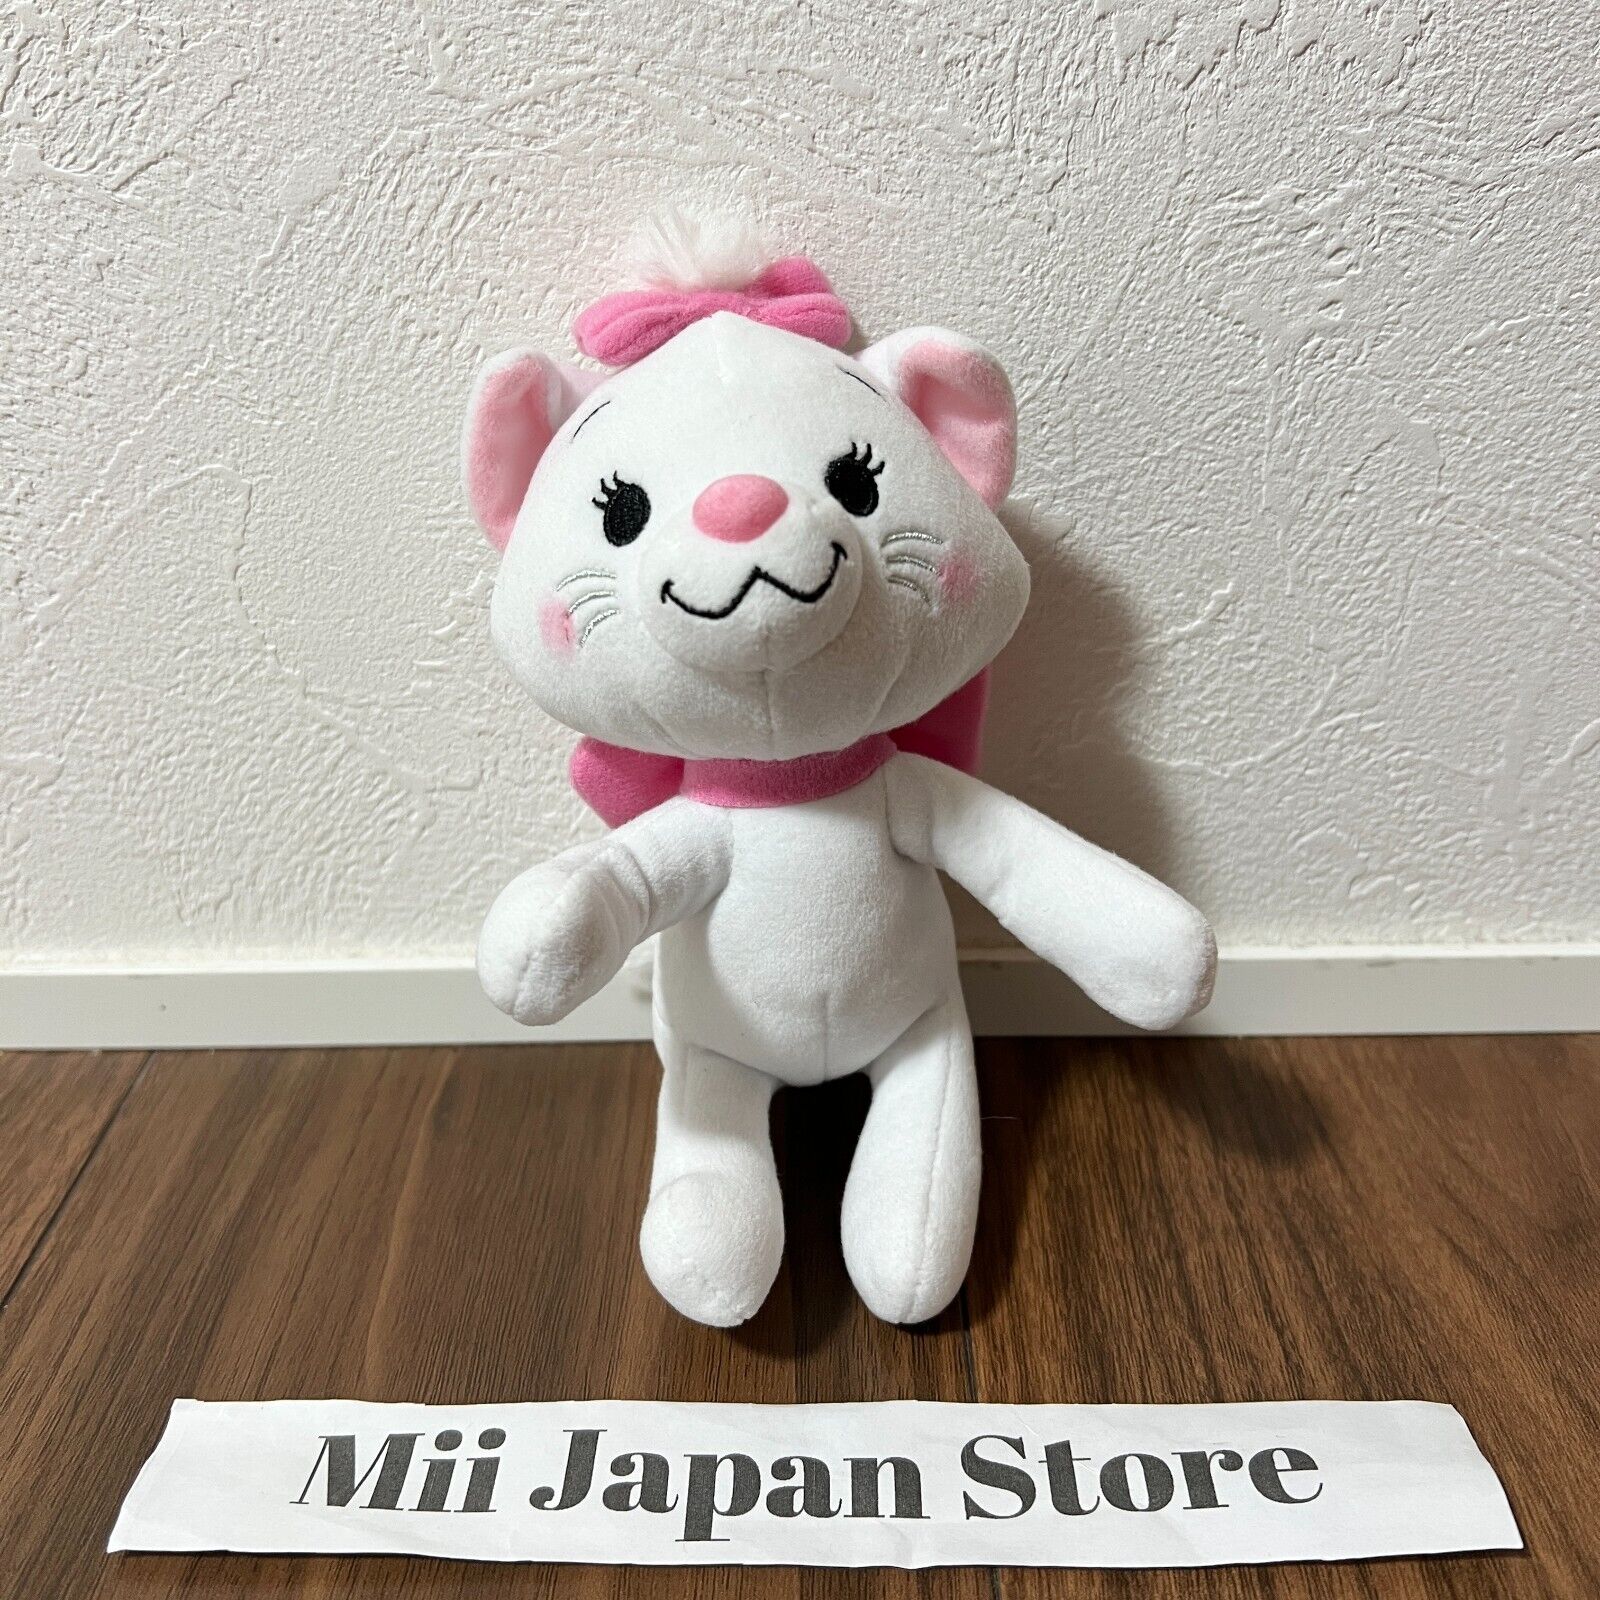 Disney Store Japan nuiMOs The Aristocat Marie Plush Doll 6.3 inch Stuffed Toy